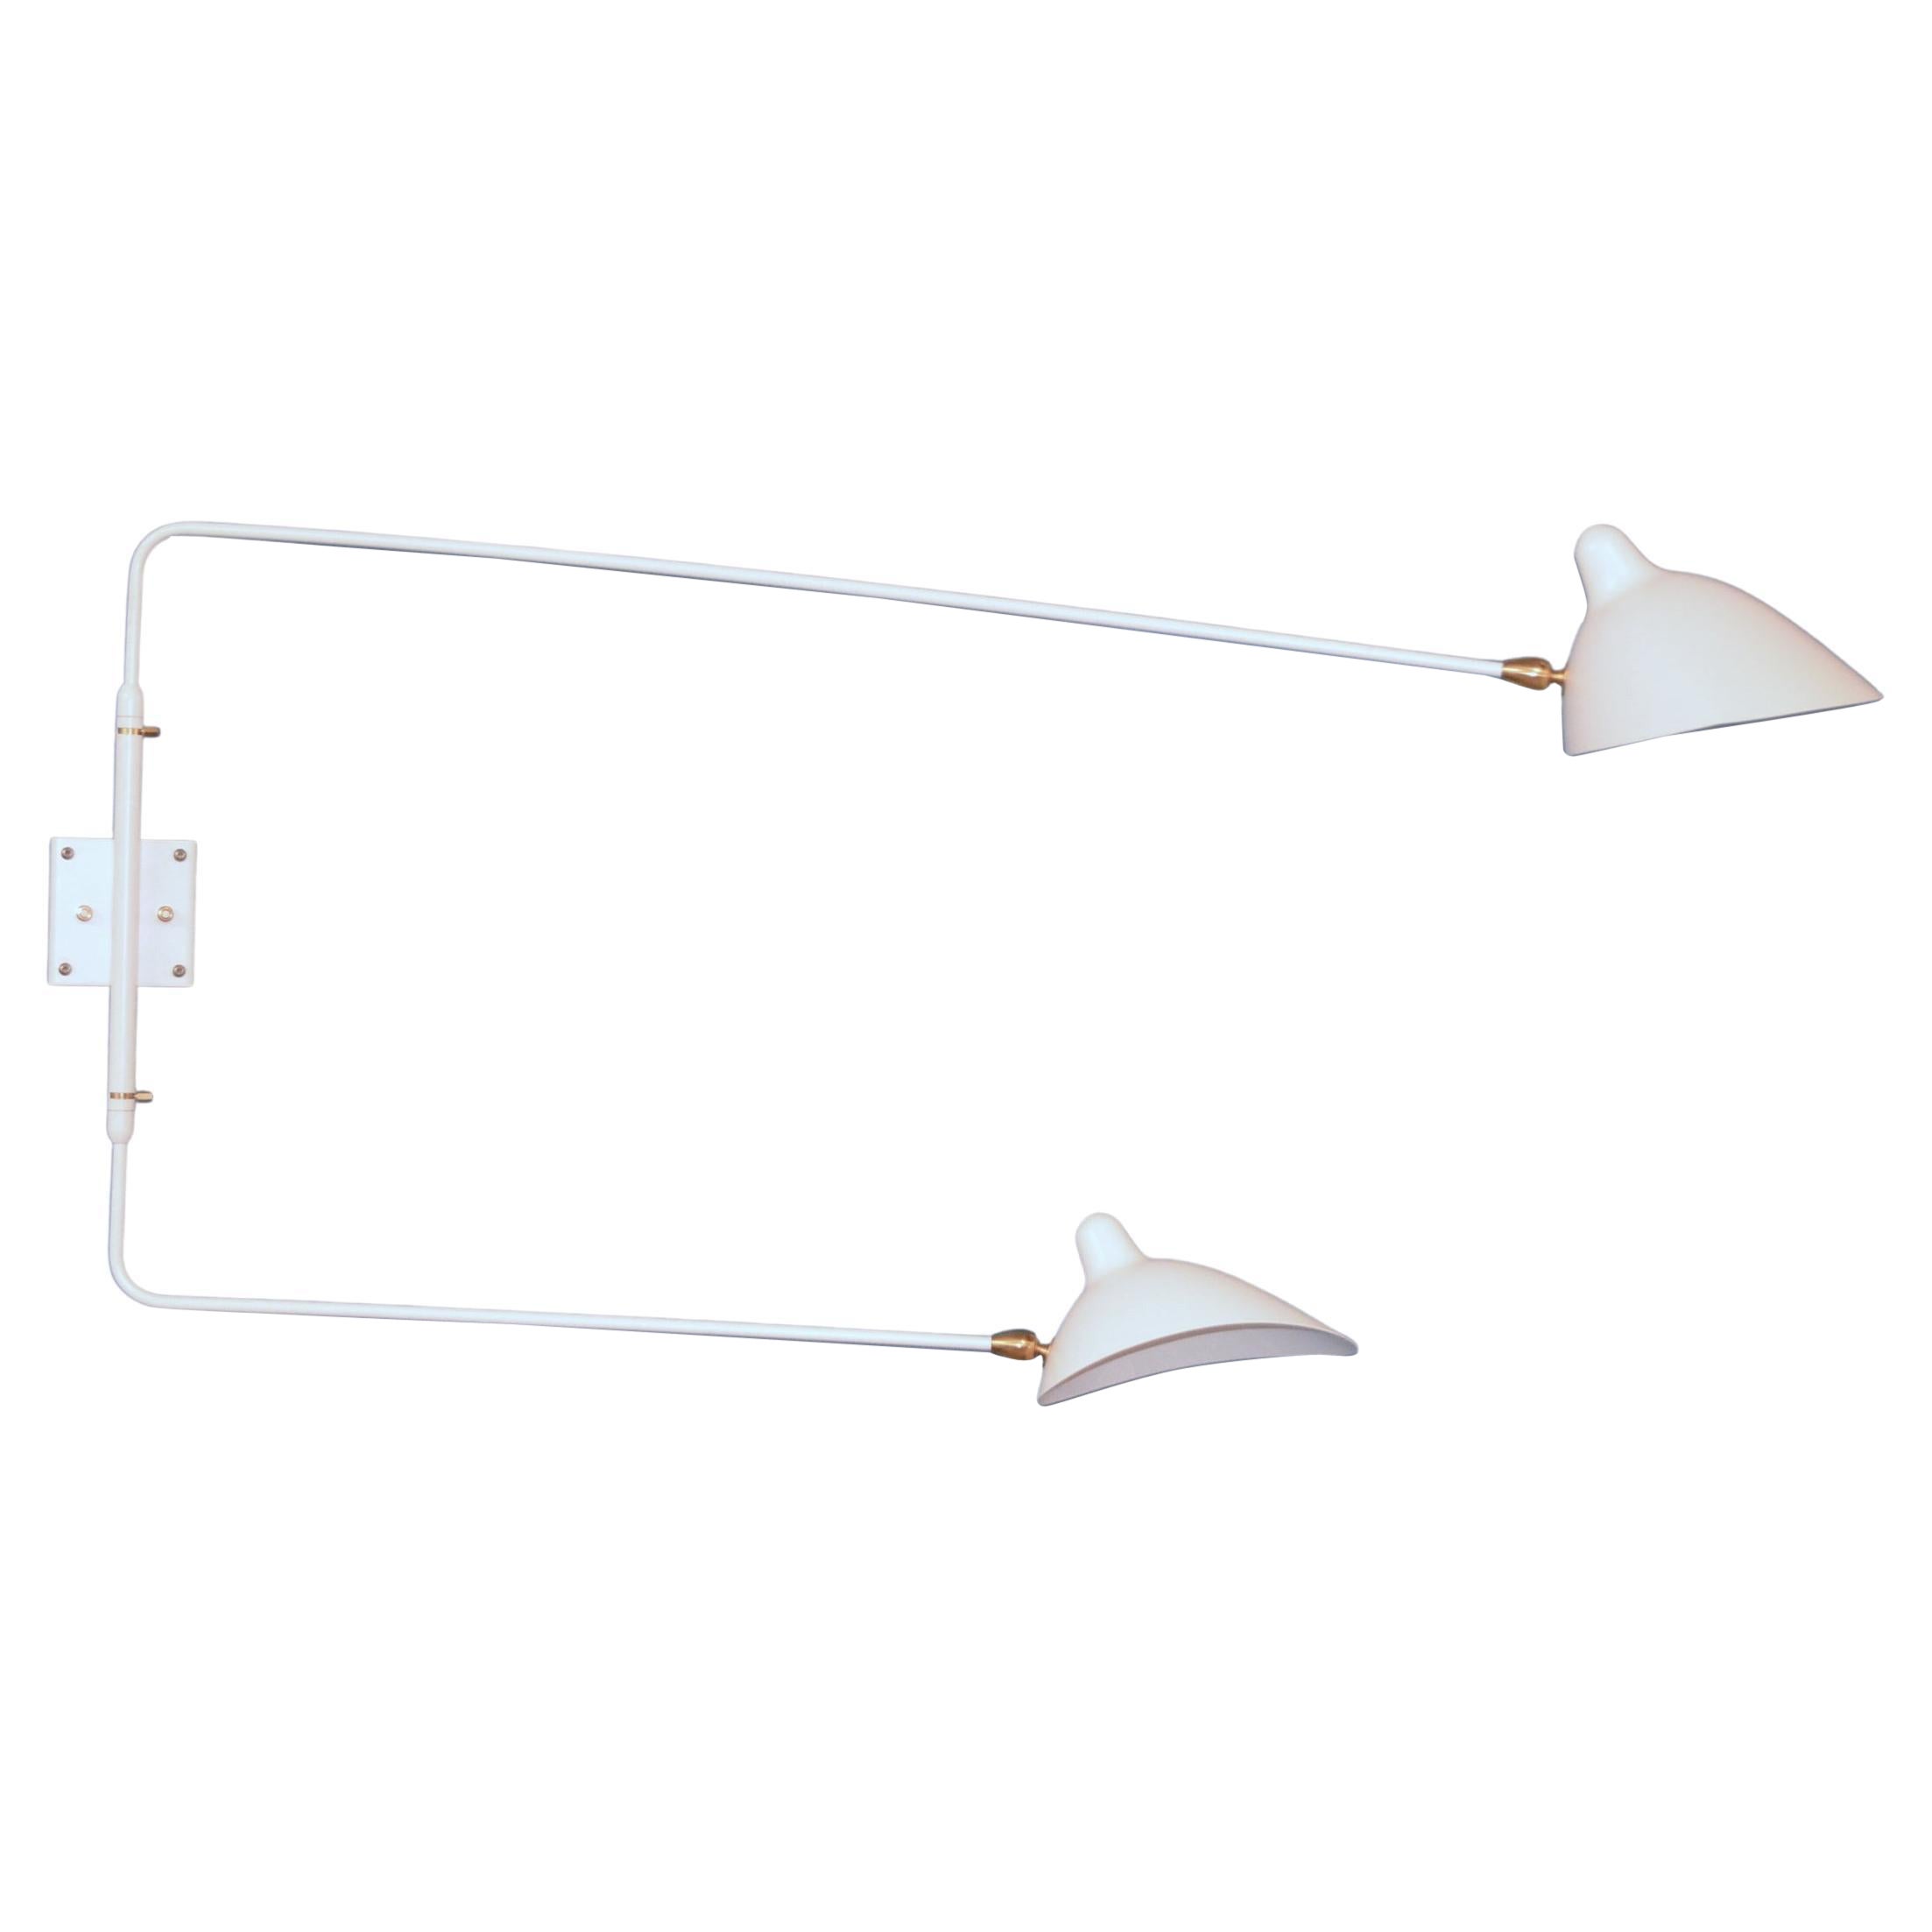 Serge Mouille - Rotating Sconce with 2 Arms in White